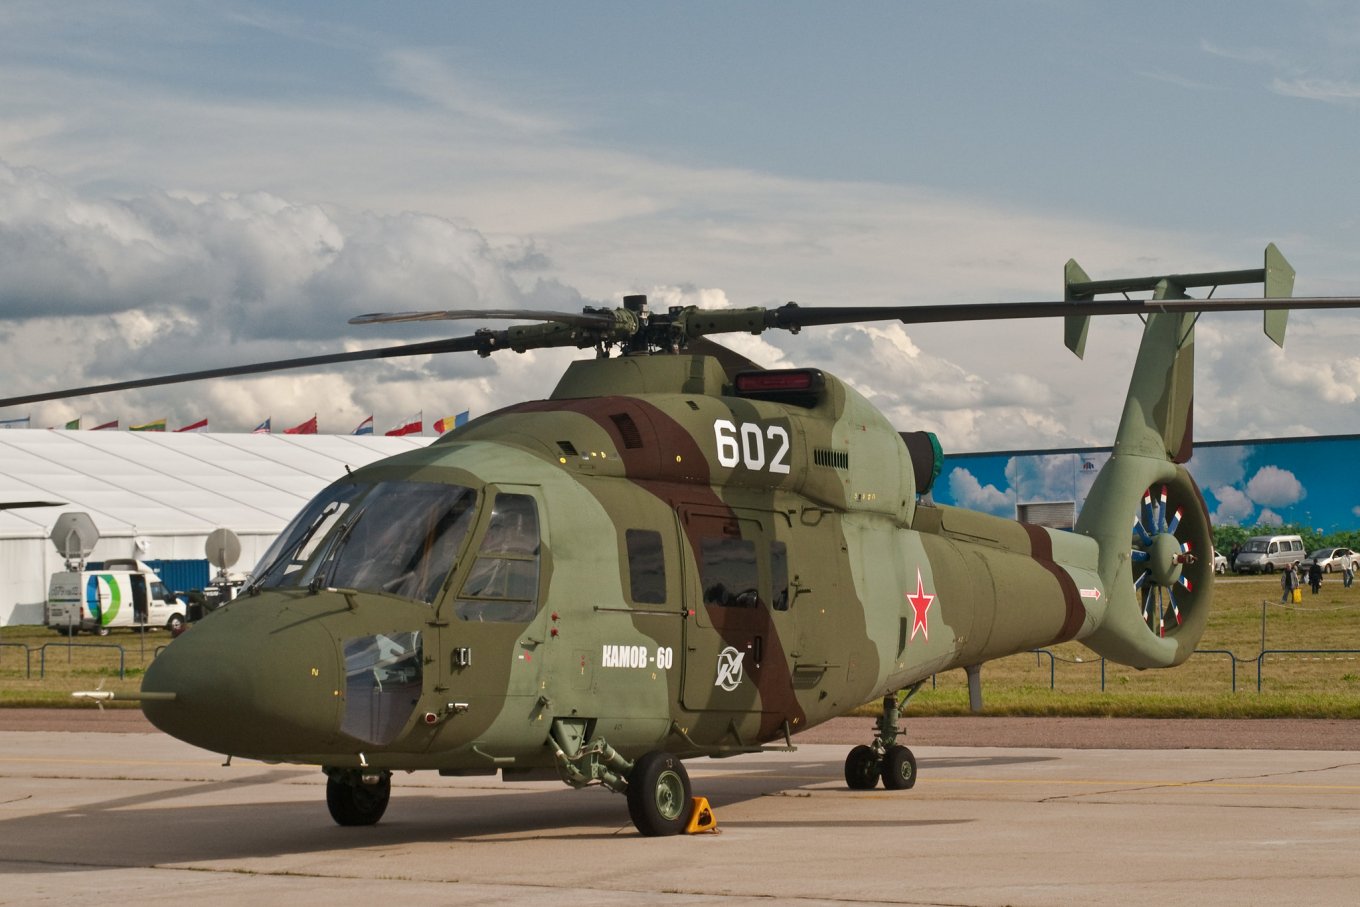 The Ka-60 transport helicopter Defense Express Russia Won’t Certify Ka-62 Helicopter: No Import, No Crafts